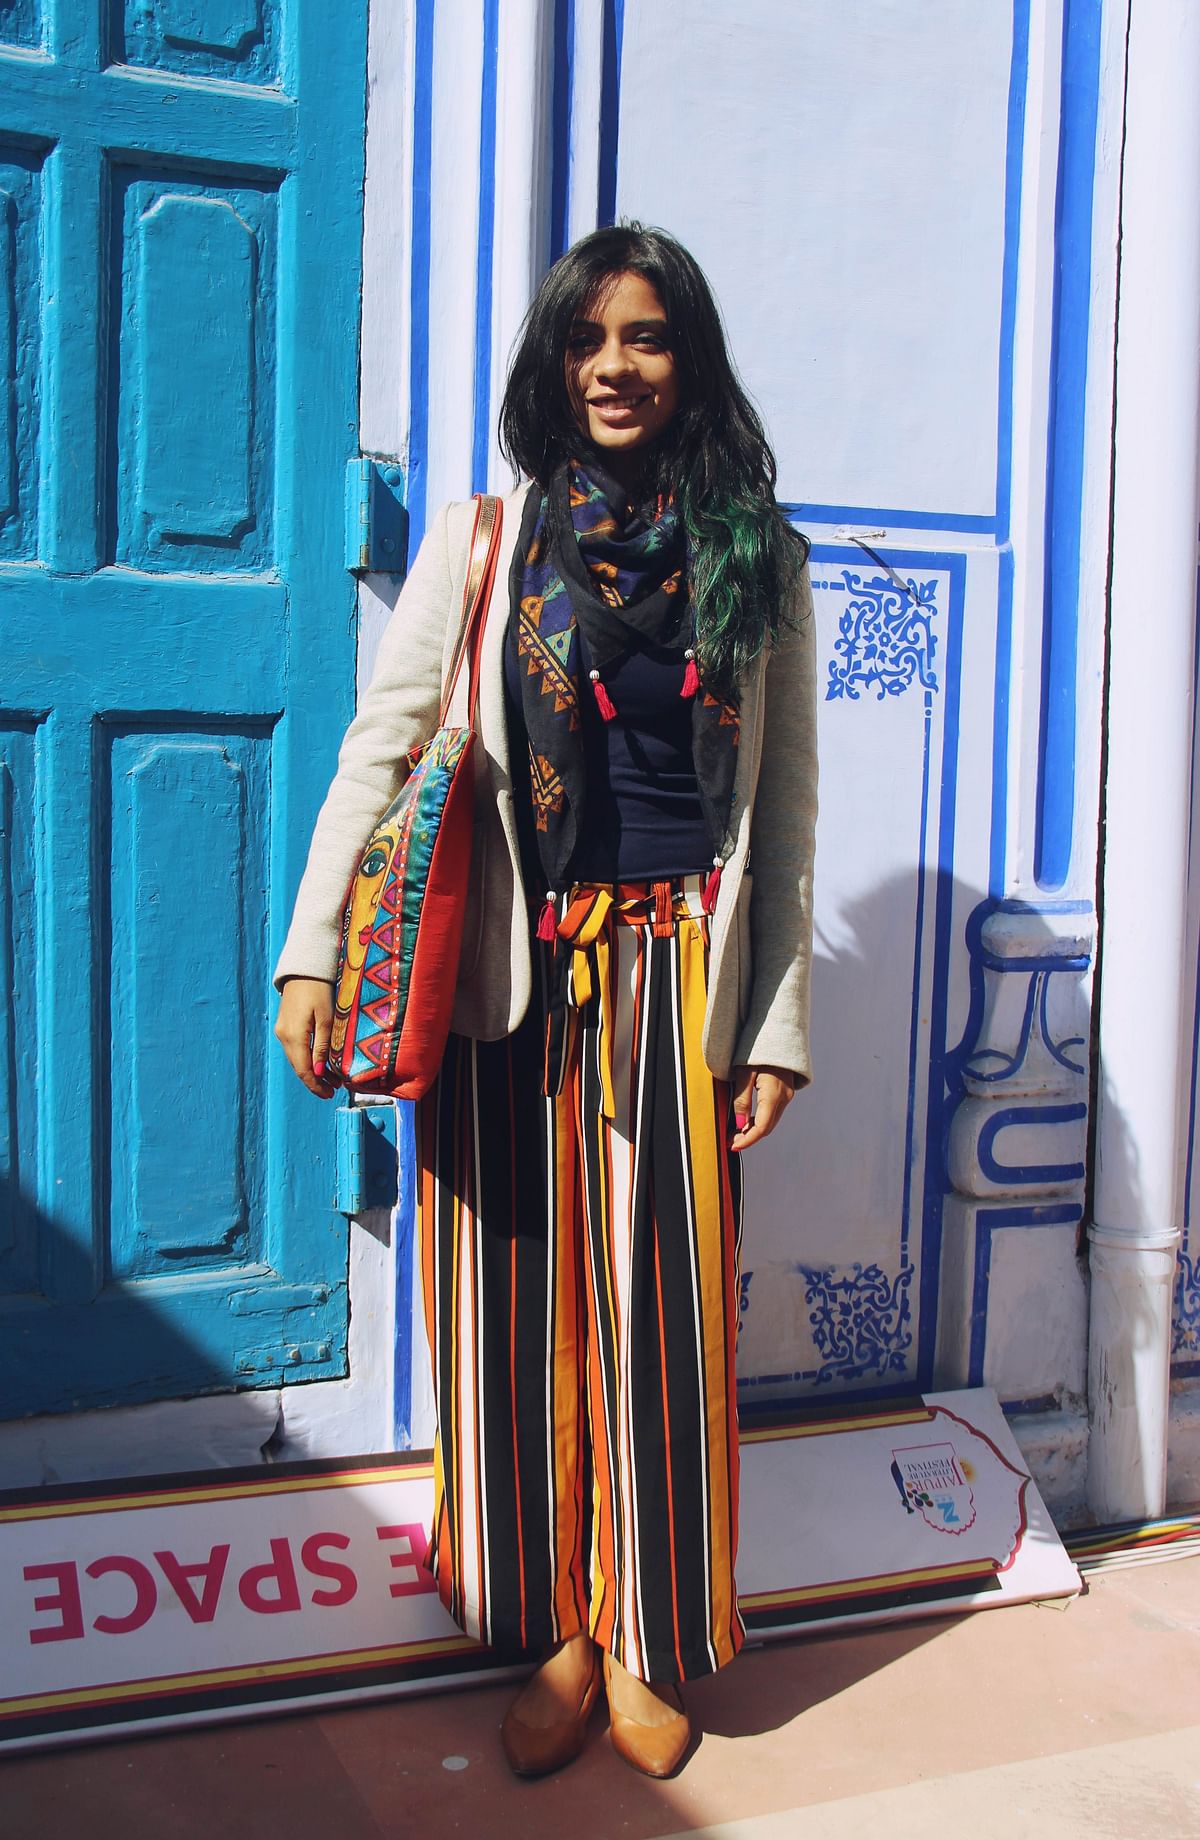 It’s an interesting mix of words and fashion at Jaipur Literature Festival 2017. Take a look.